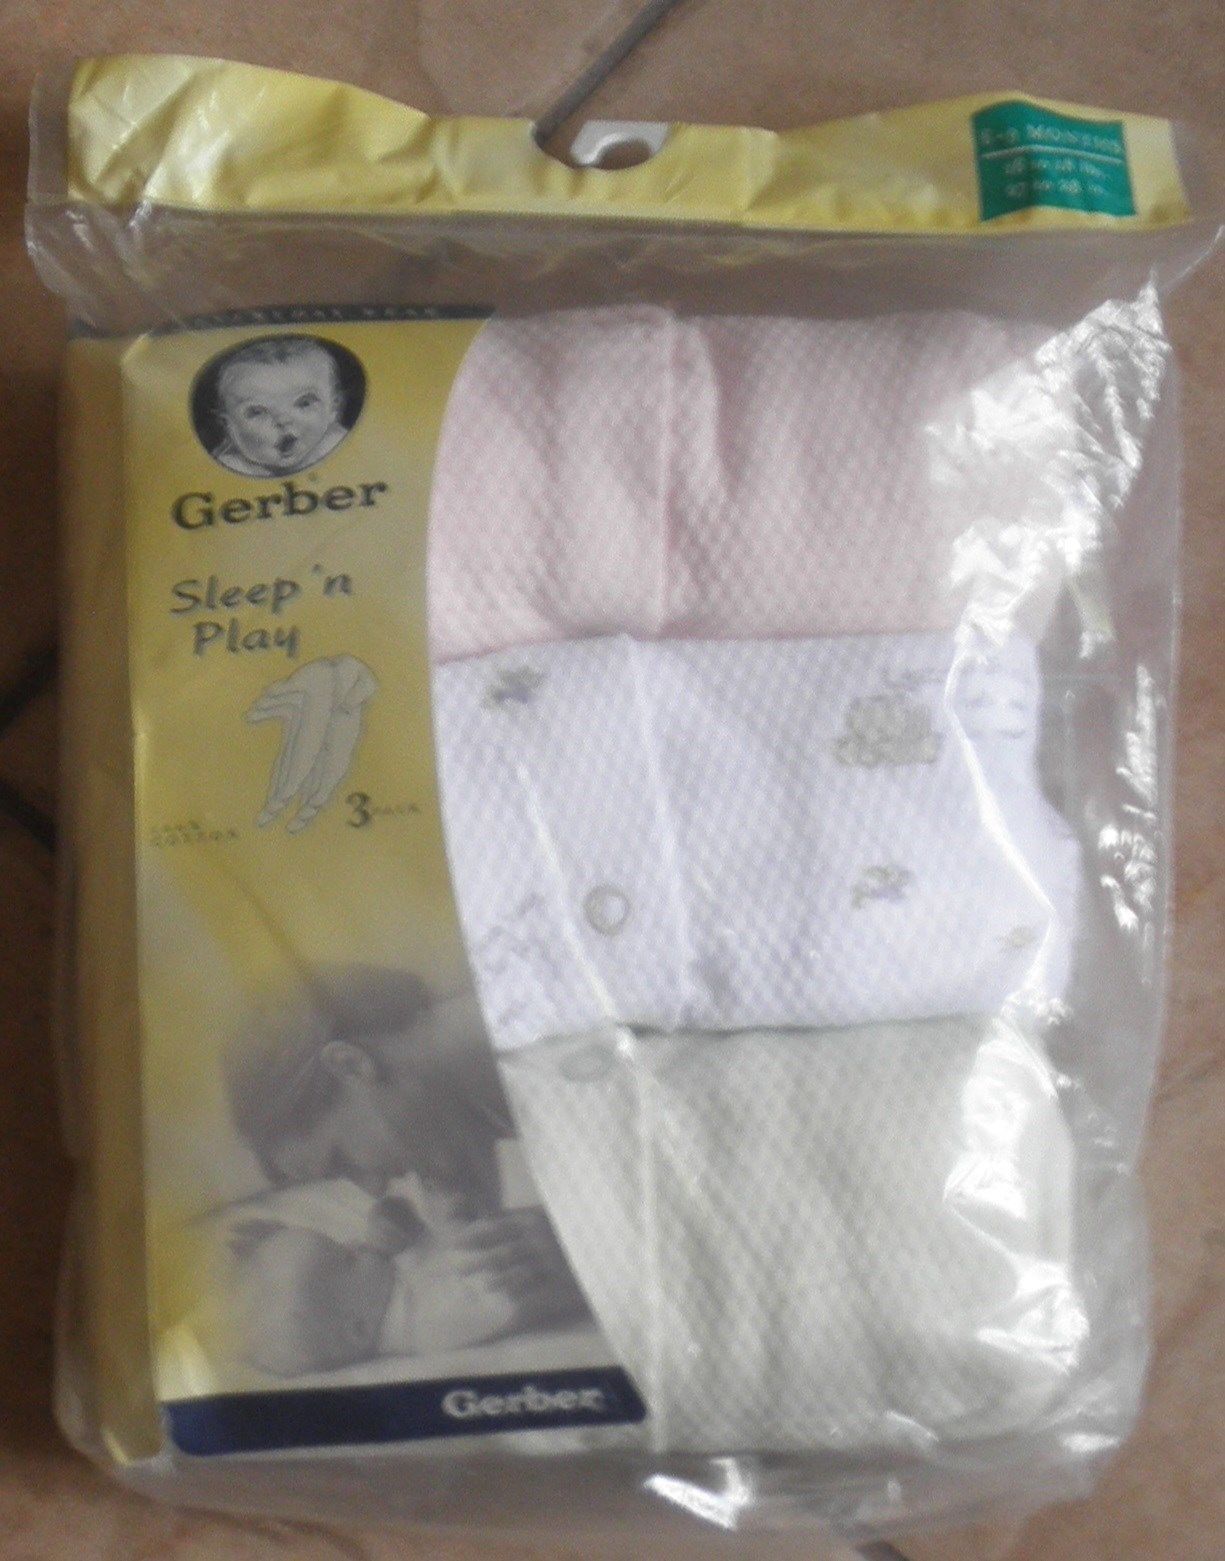 sleep and play outfit baby 3 by gerber 6 to 9 months new in sealed package - £10.36 GBP